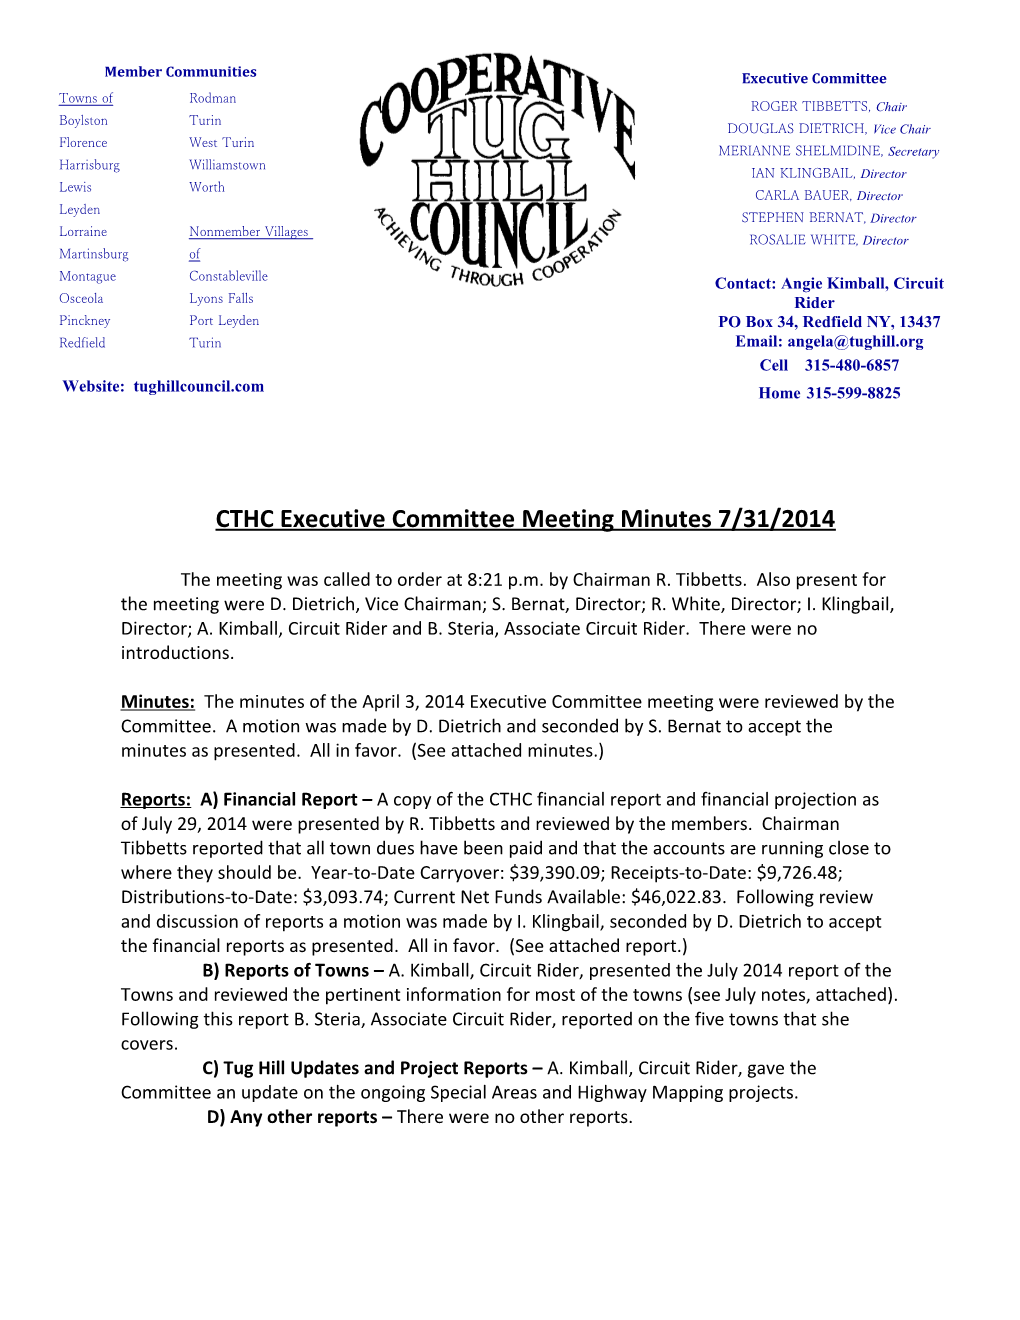 CTHC Executive Committee Meeting Minutes 7/31/2014